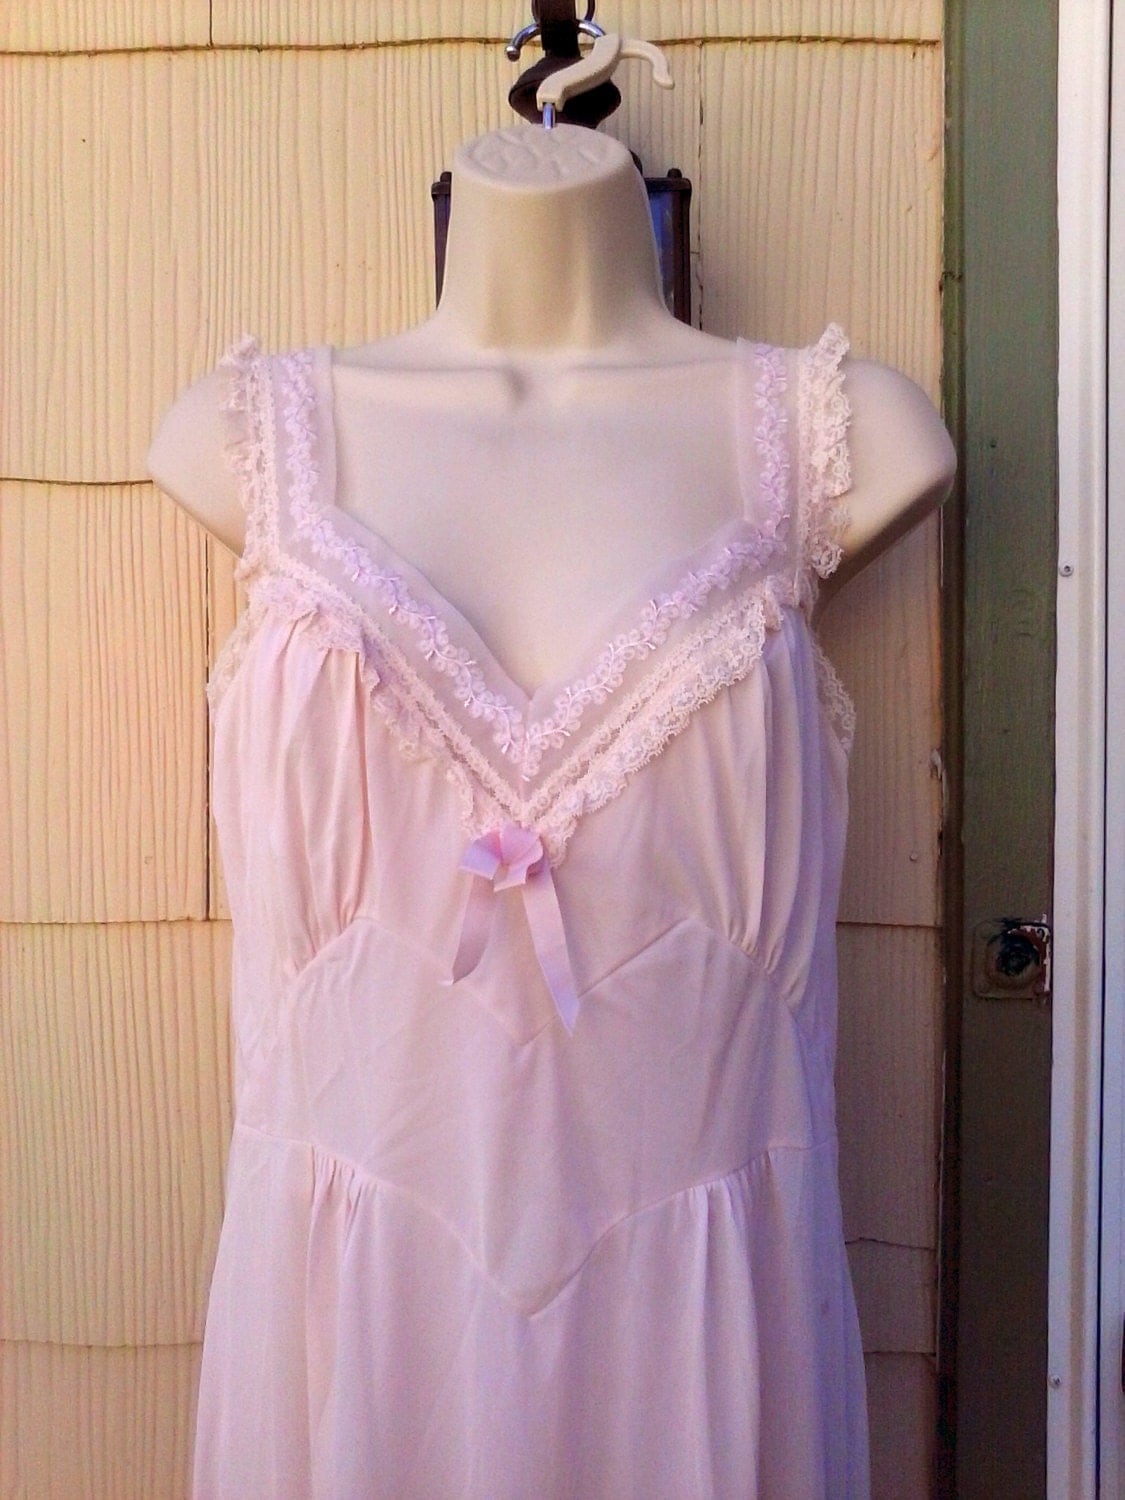 Vintage 1940s 40s Nightgown Lingerie Pink Lace Nylon Pin Up